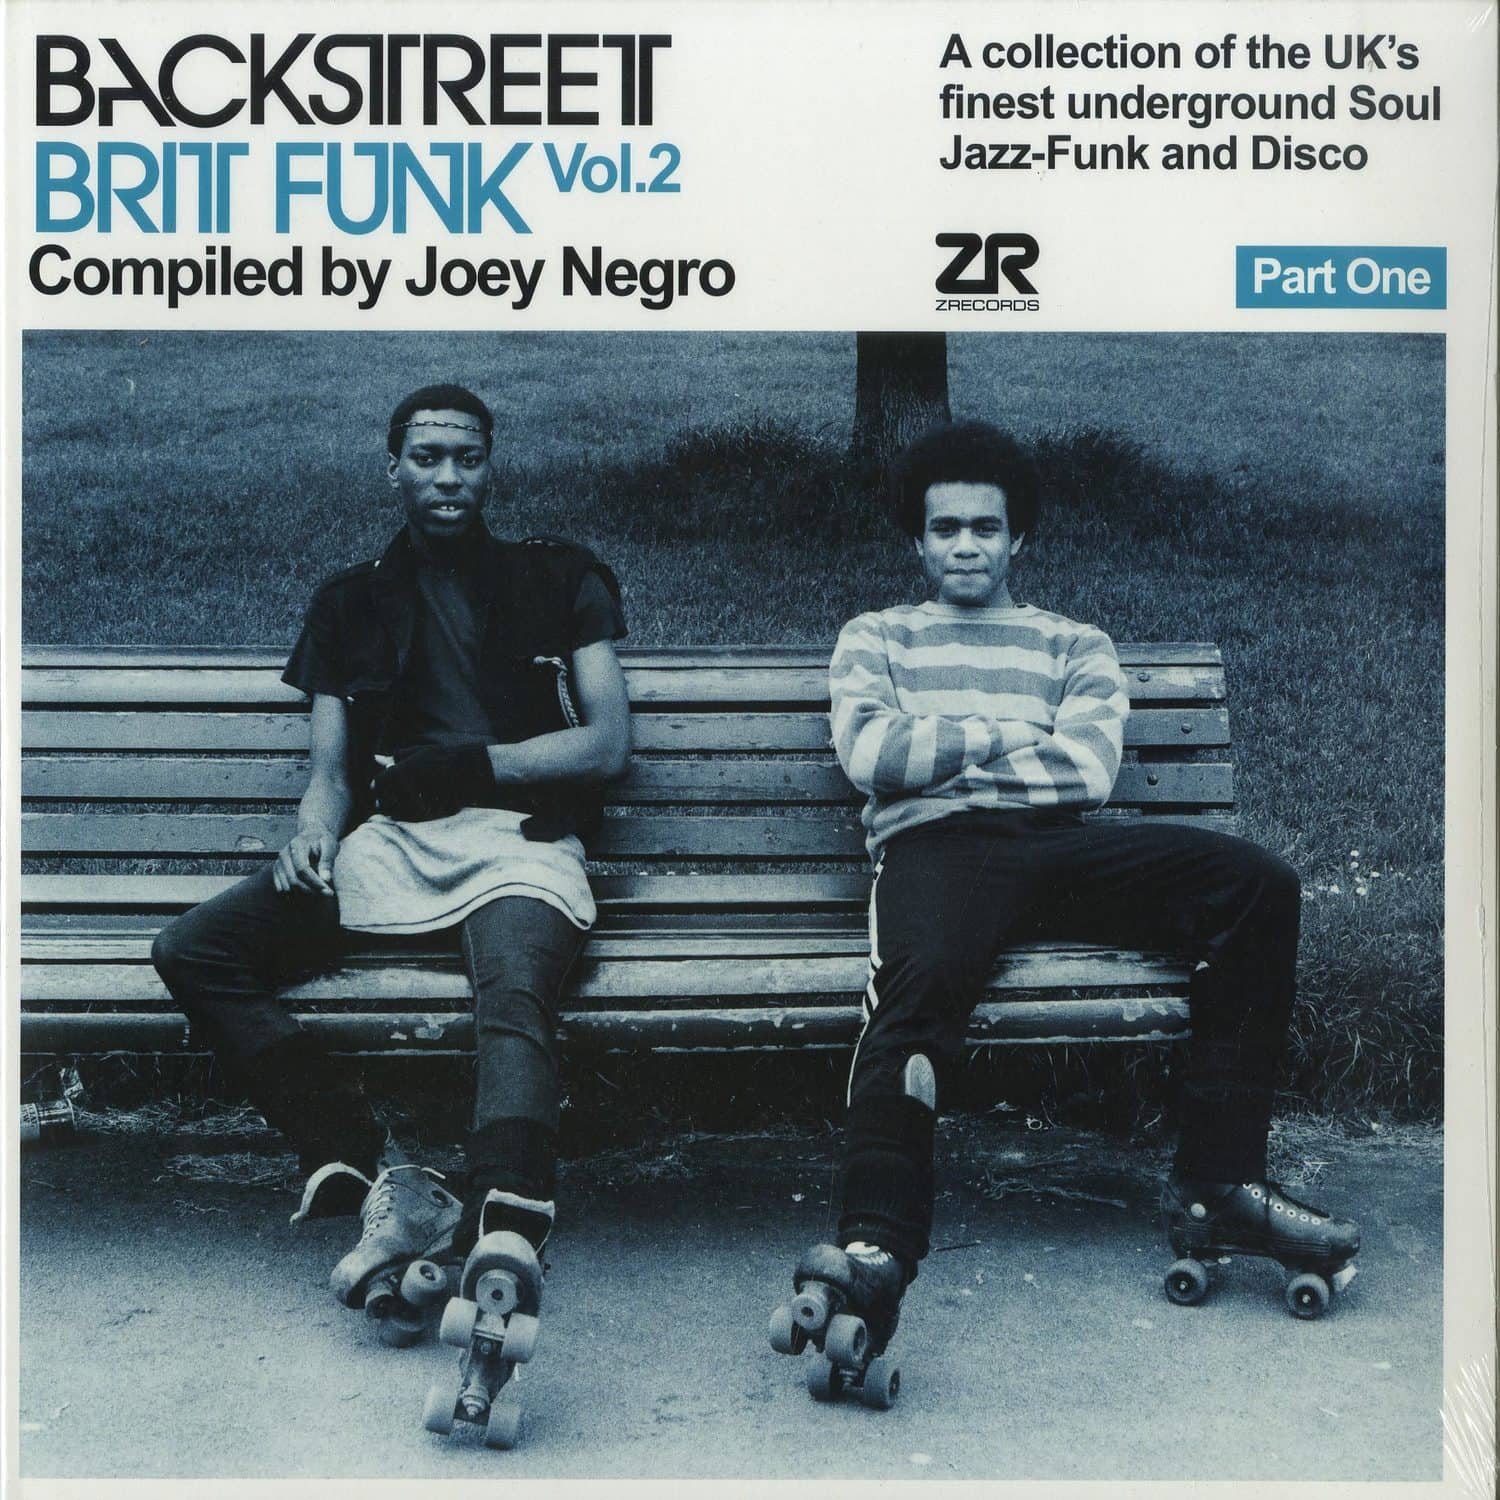 Various Artists , compiled by Joey Negro - BACKSTREET BRIT FUNK VOL.2 - PART 1 